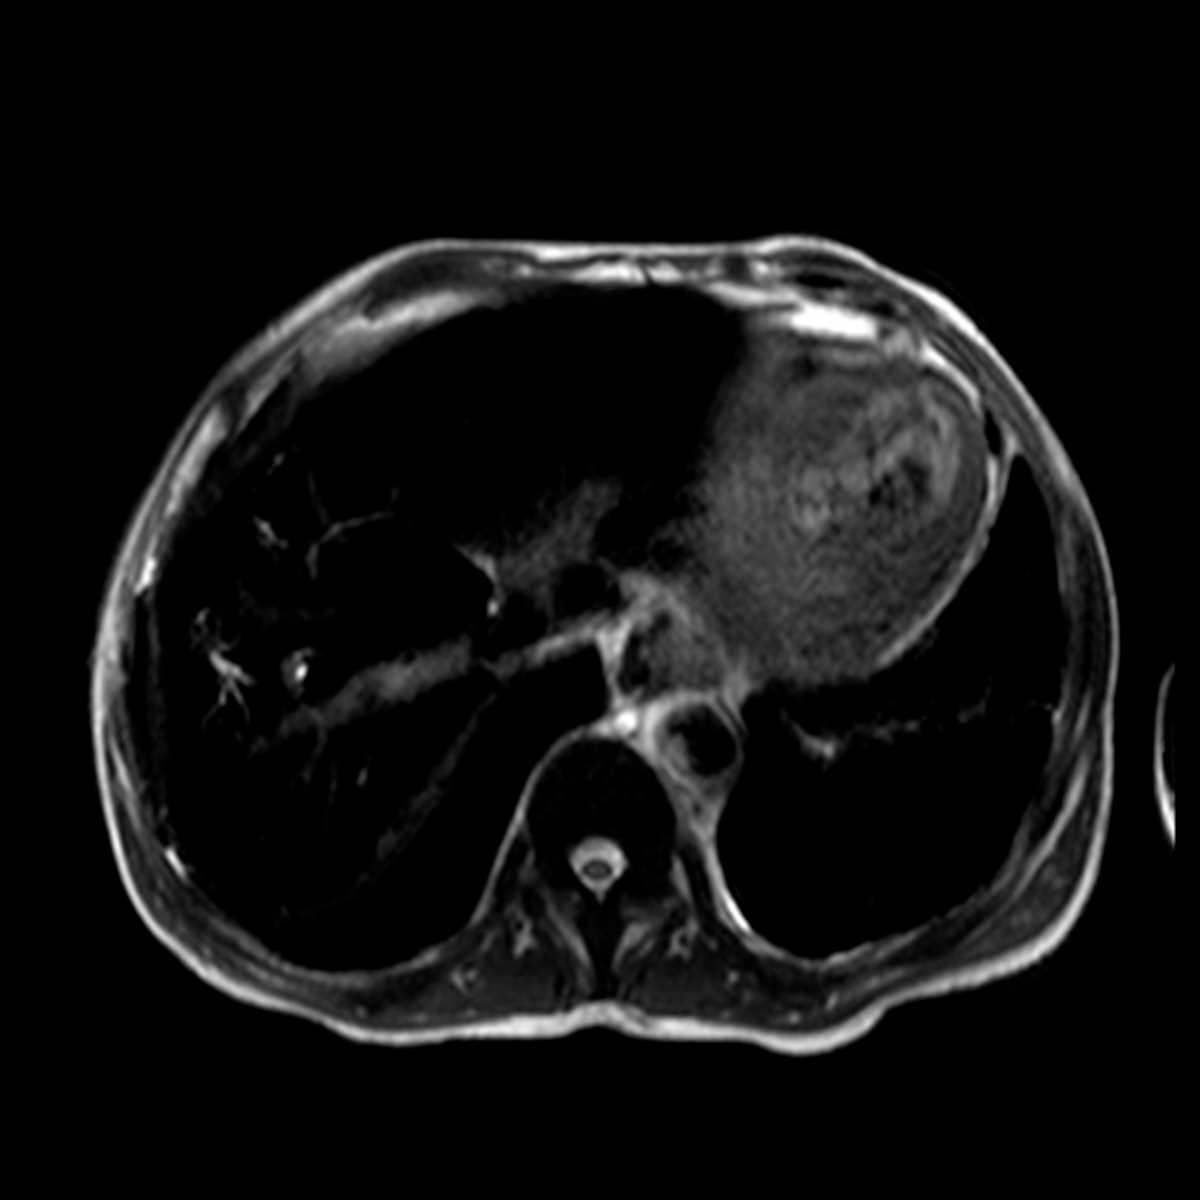 Hemosiderosis in the Liver in a patient with sickle cell anemia. - CTisus CT Scan